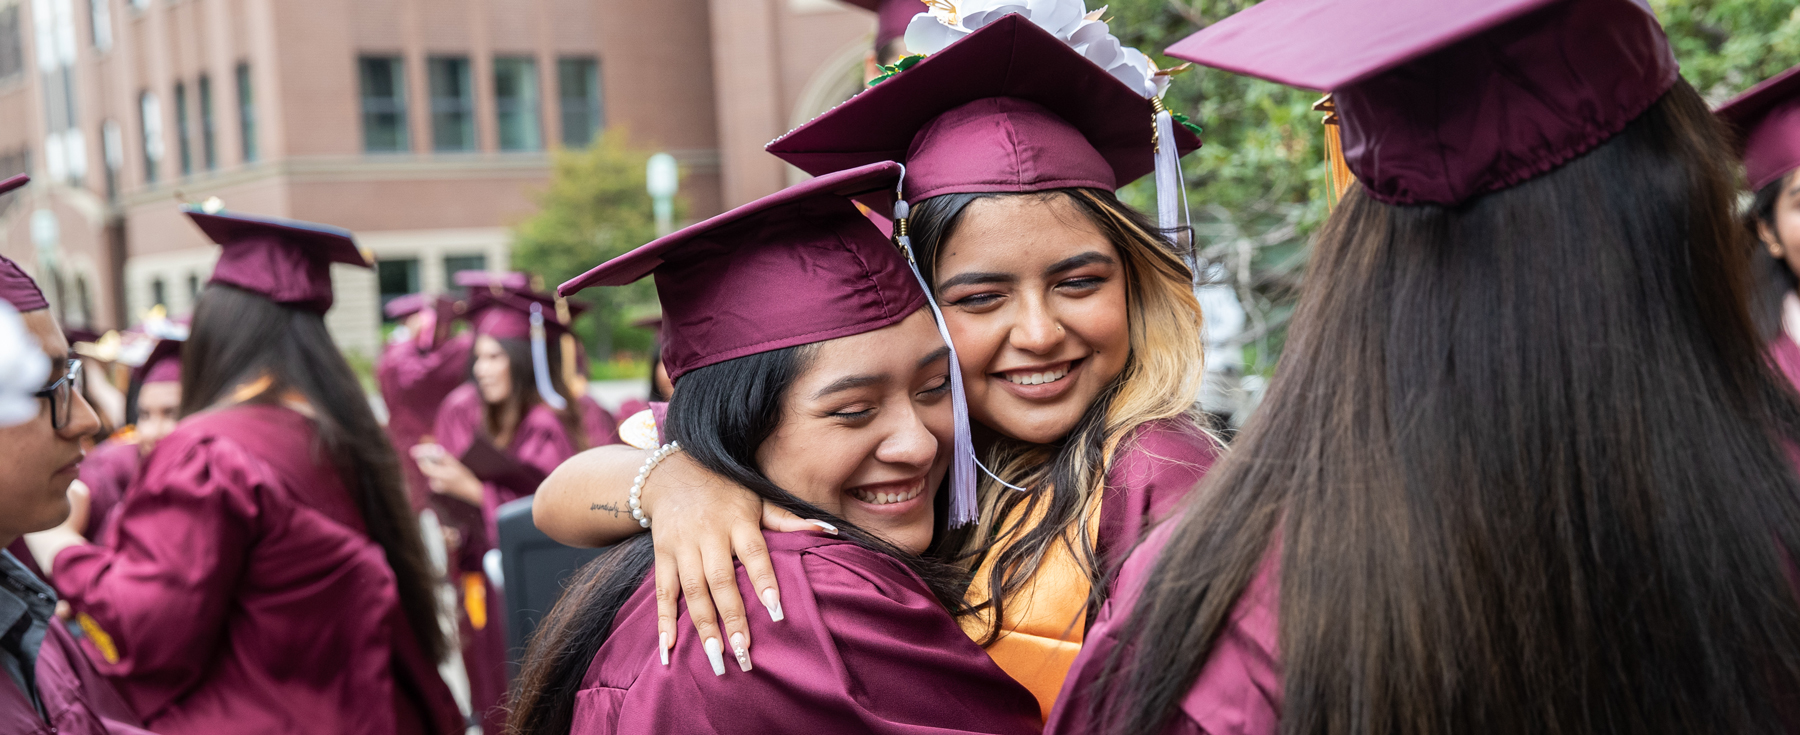 Arrupe College of Loyola University Chicago held its commencement ceremony